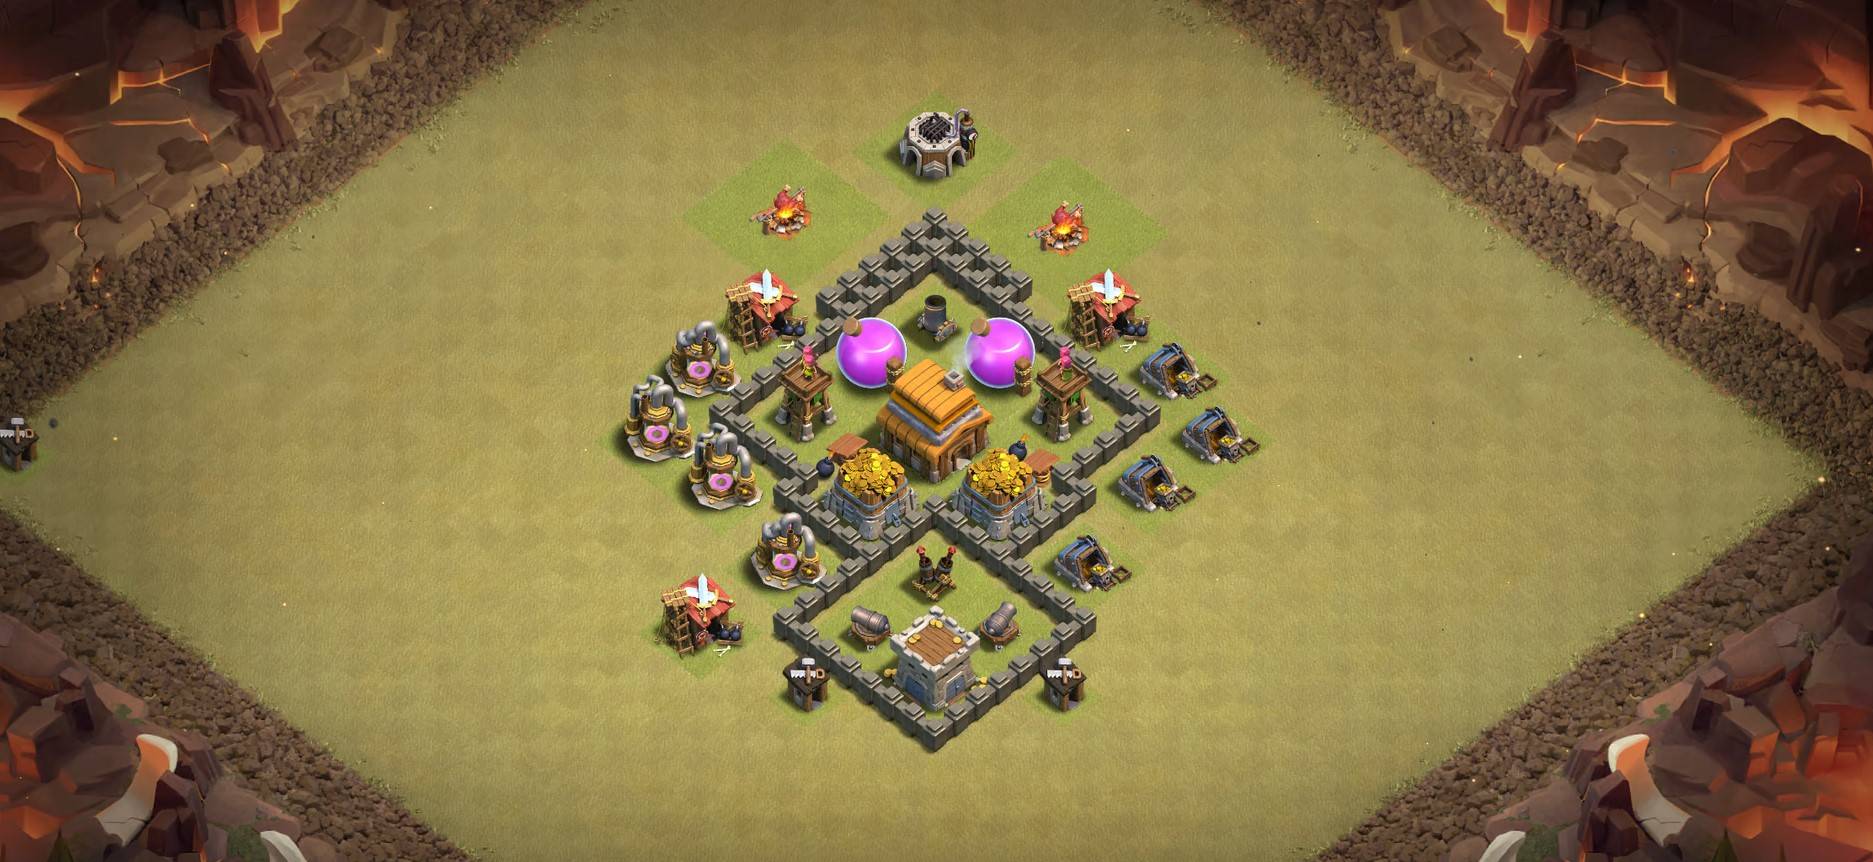 th4 trophy base anti everything copy link